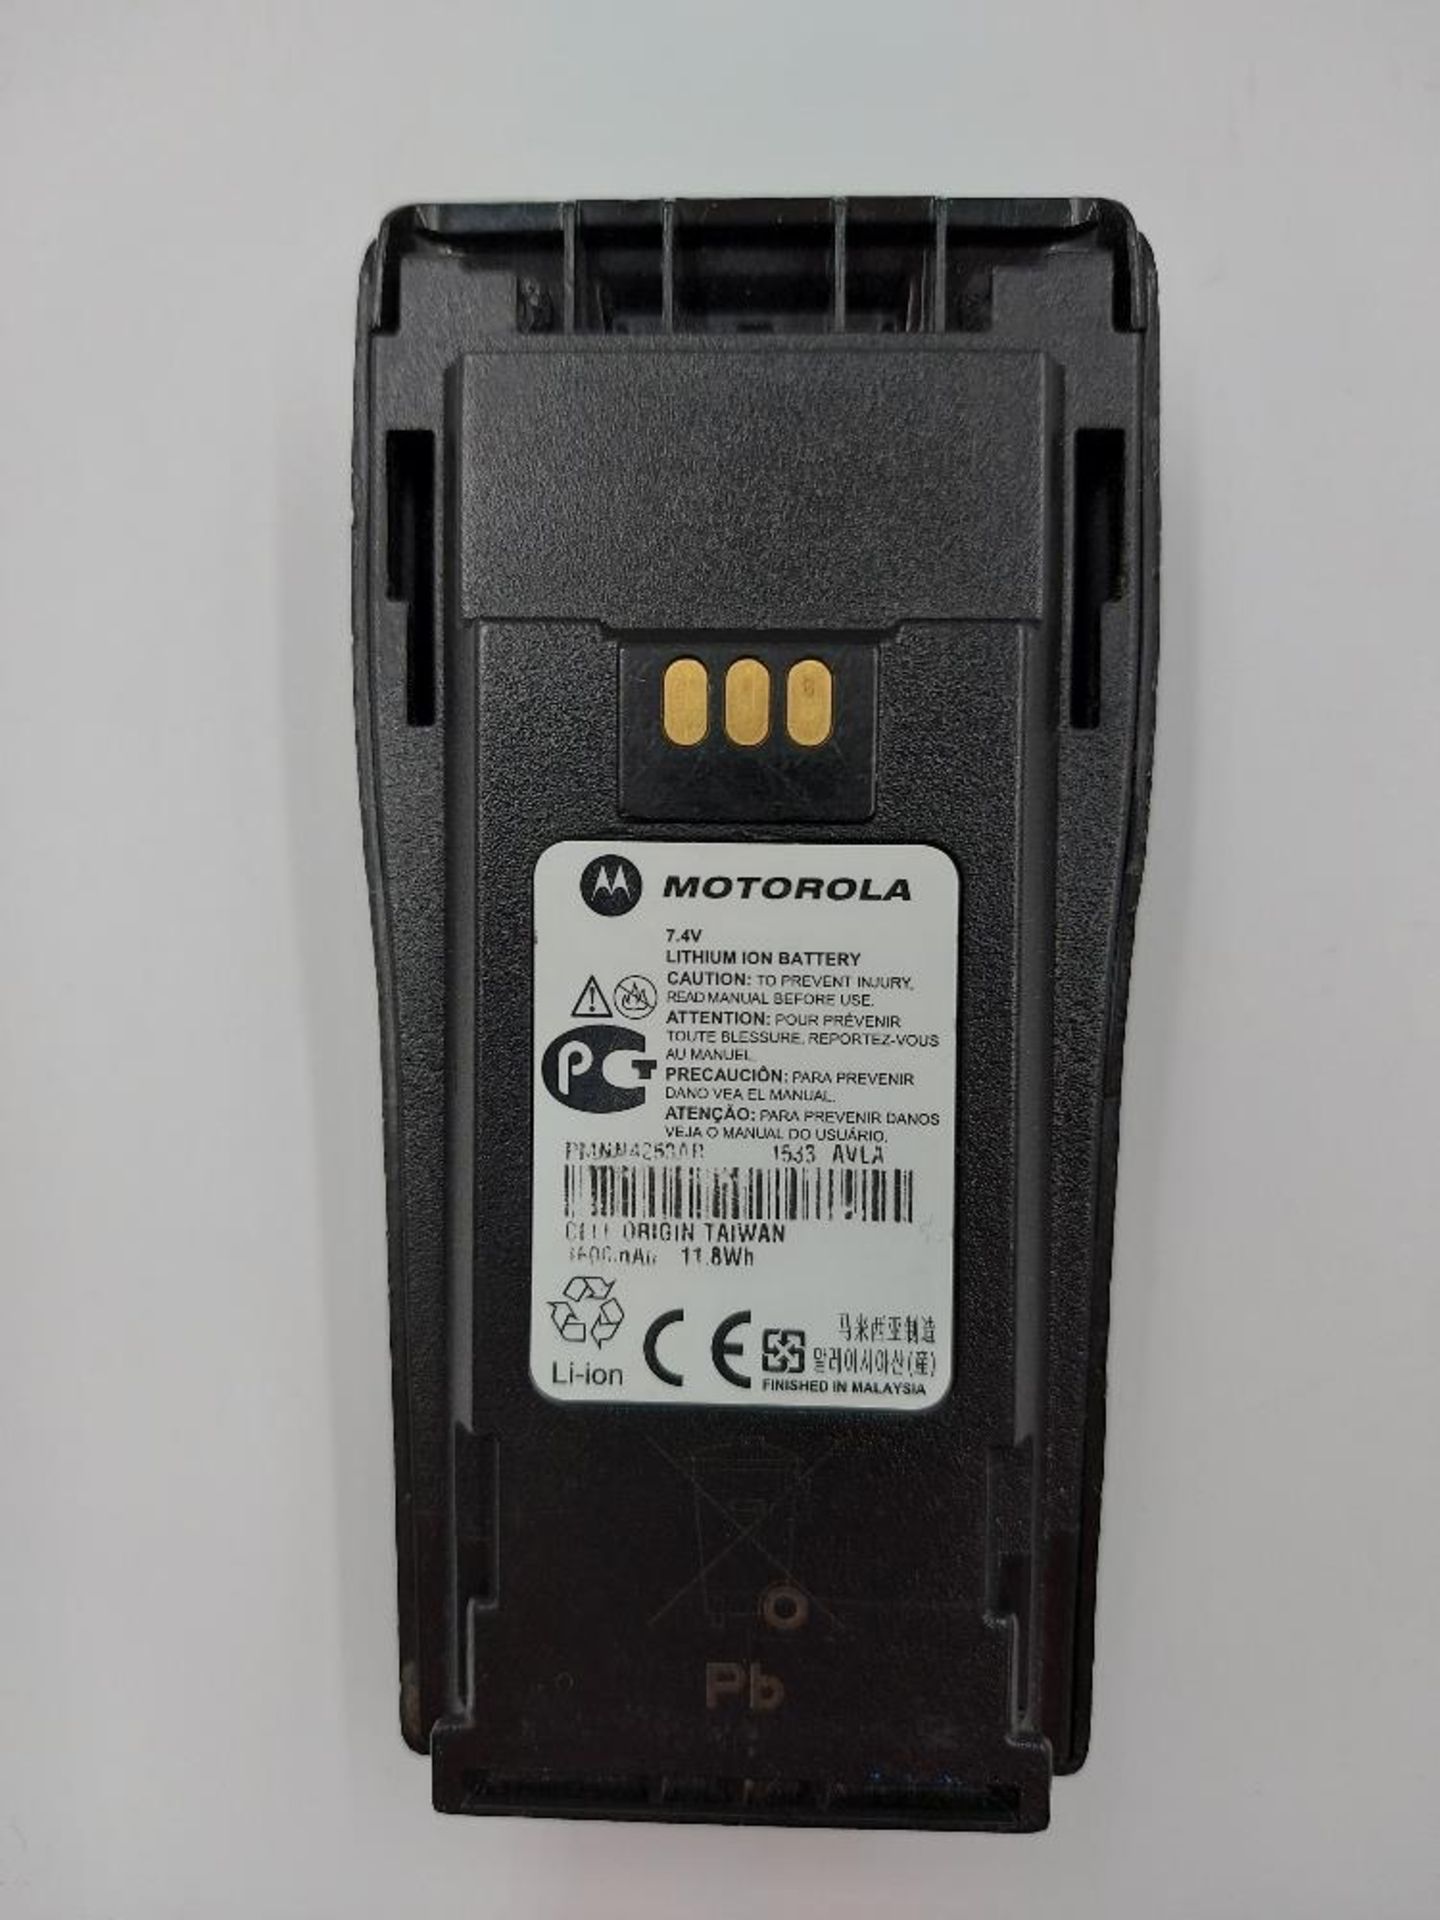 (12) Motorola Walkie Talkie Batteries With 6 Way Charger - Image 3 of 4